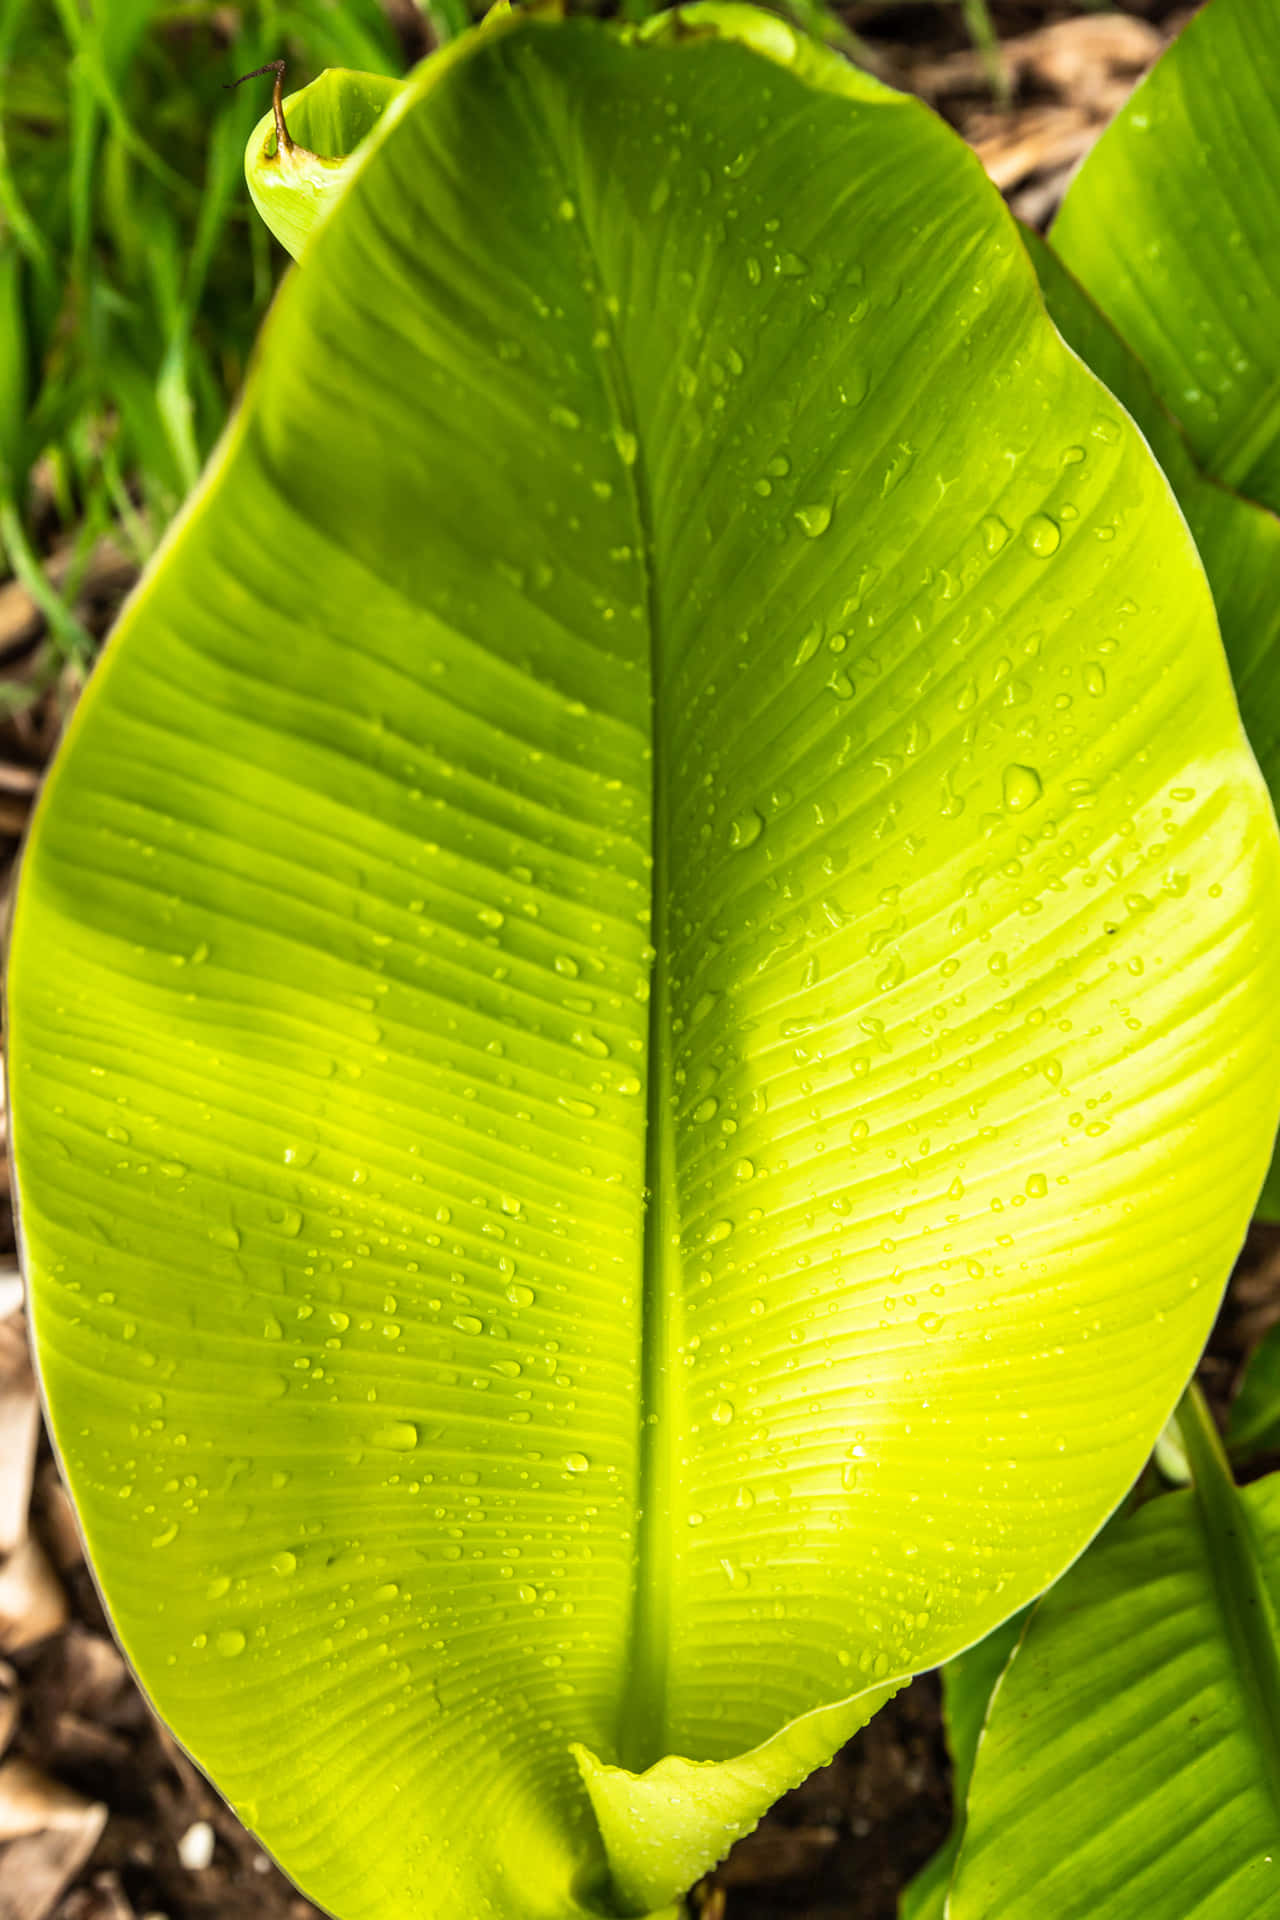 "Immerse yourself in nature's beauty with a Banana Leaf"